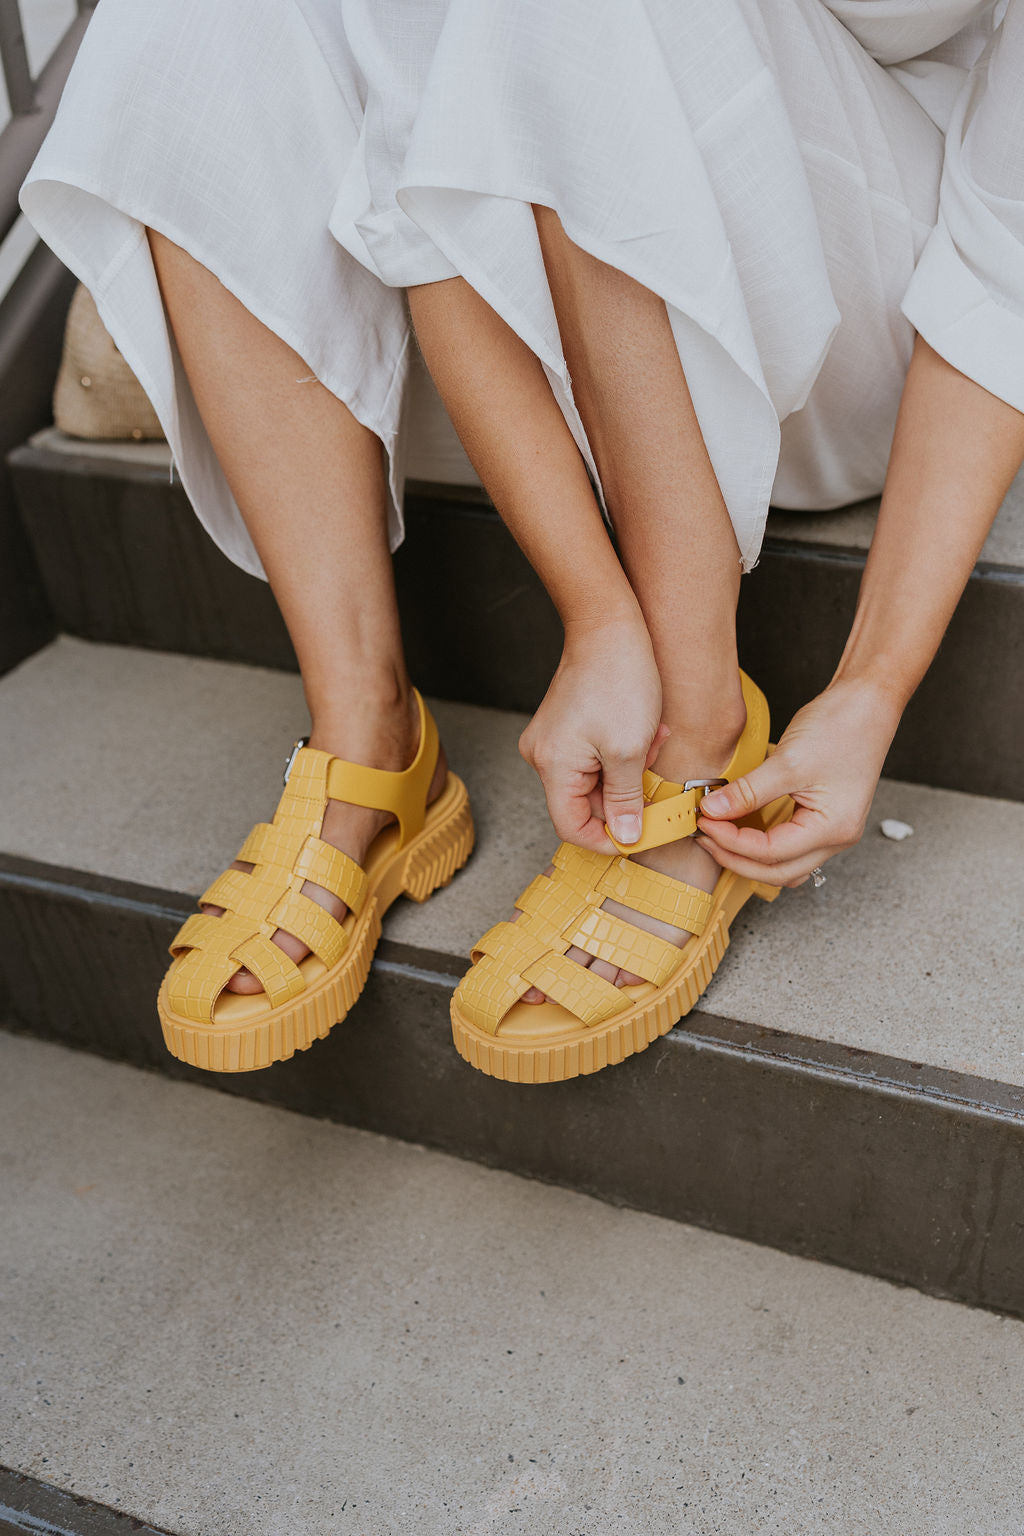 Side view of female model wearing the ONA Streetworks Fisherman Sandal in Yellow Ray & Pilsner which features Yellow Leather Upper Fabric, Monochrome Croc Details, Fisherman Sandal Silhouette, Adjustable Buckle Closure, 2" Heel Height and 1 1/2" Platform Height